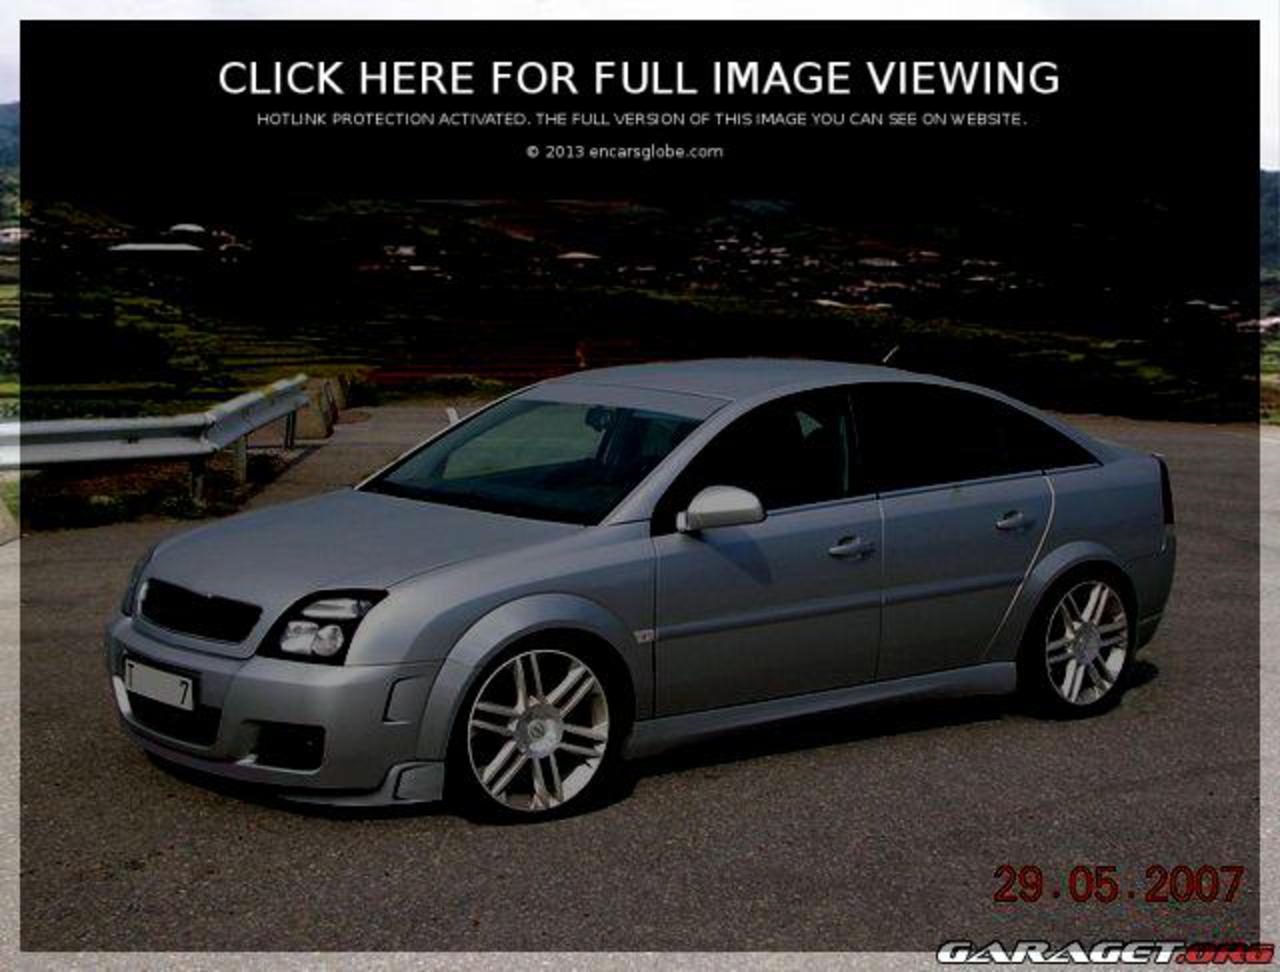 Irmscher Vectra Photo Gallery: Photo #02 out of 11, Image Size ...